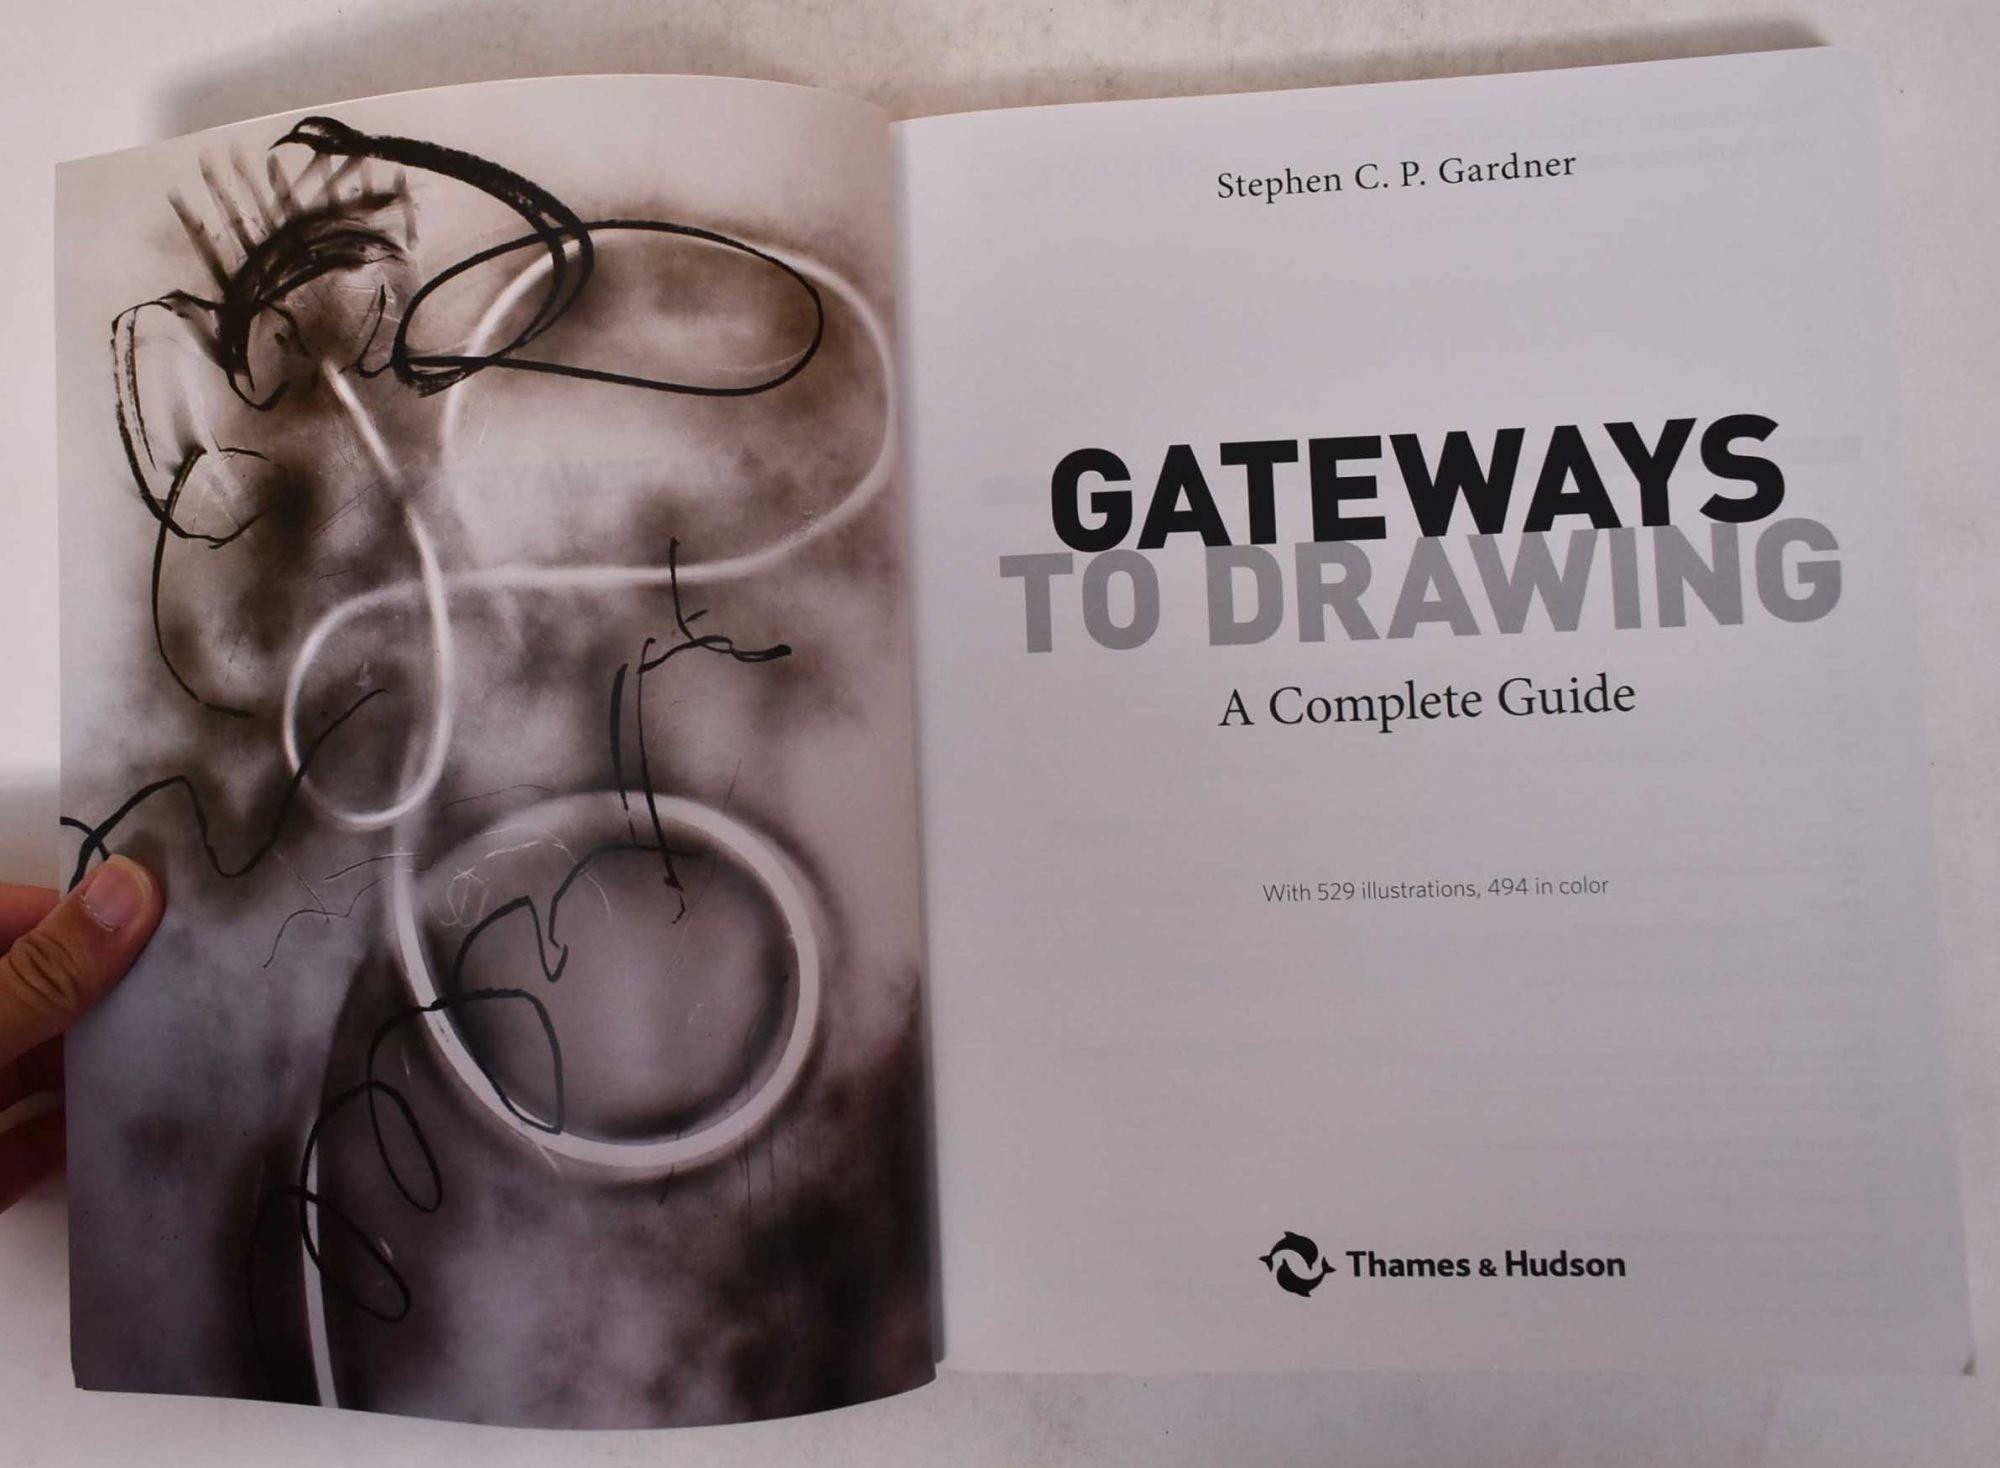 Gateways To Drawing A Complete Guide and Sketchbook Two books together